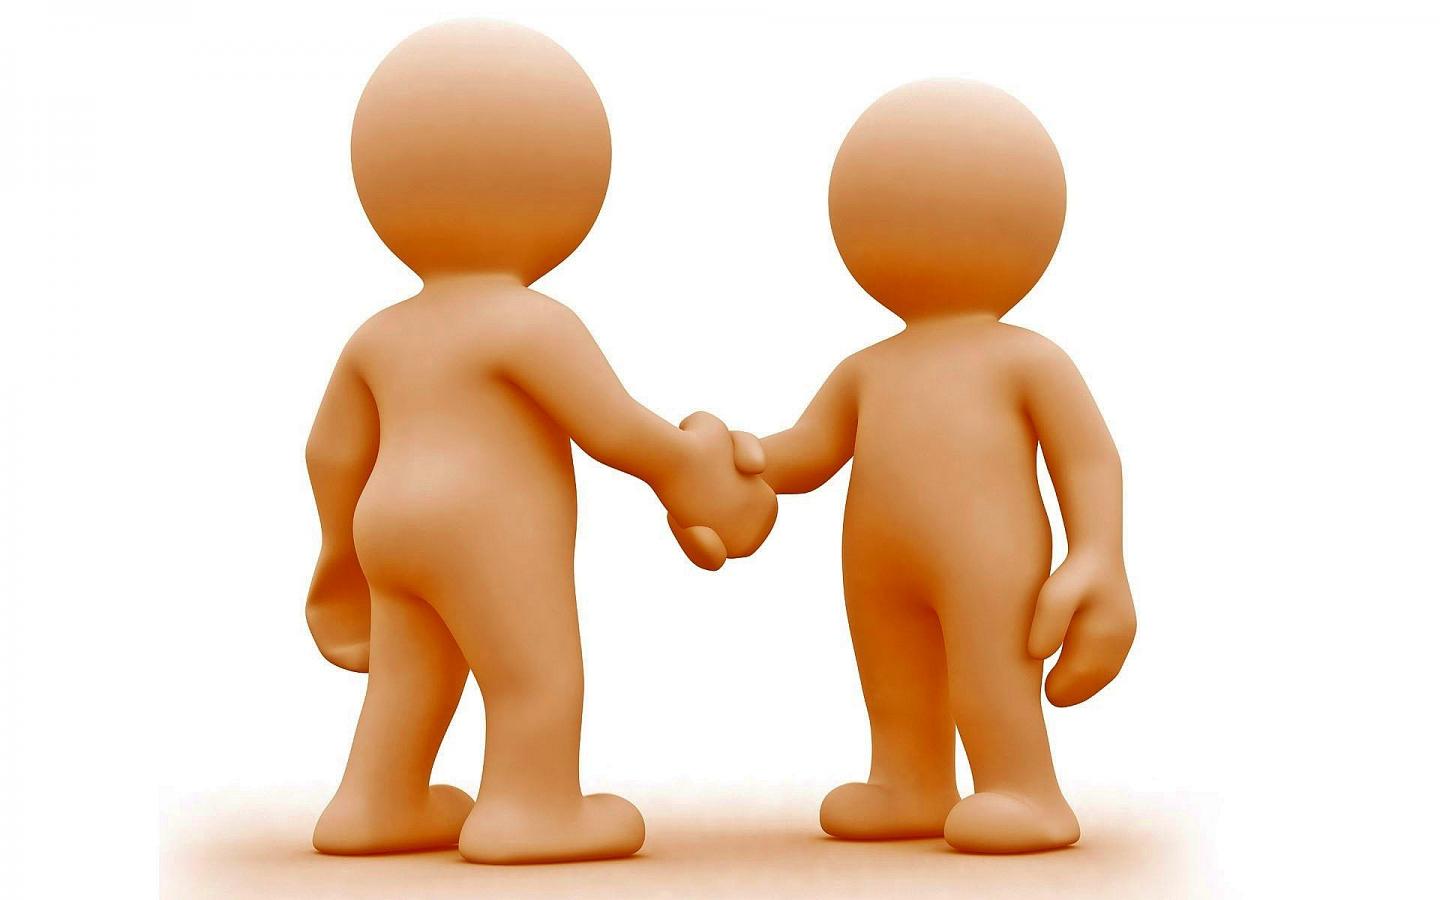 Shake Hand Picture - ClipArt Best